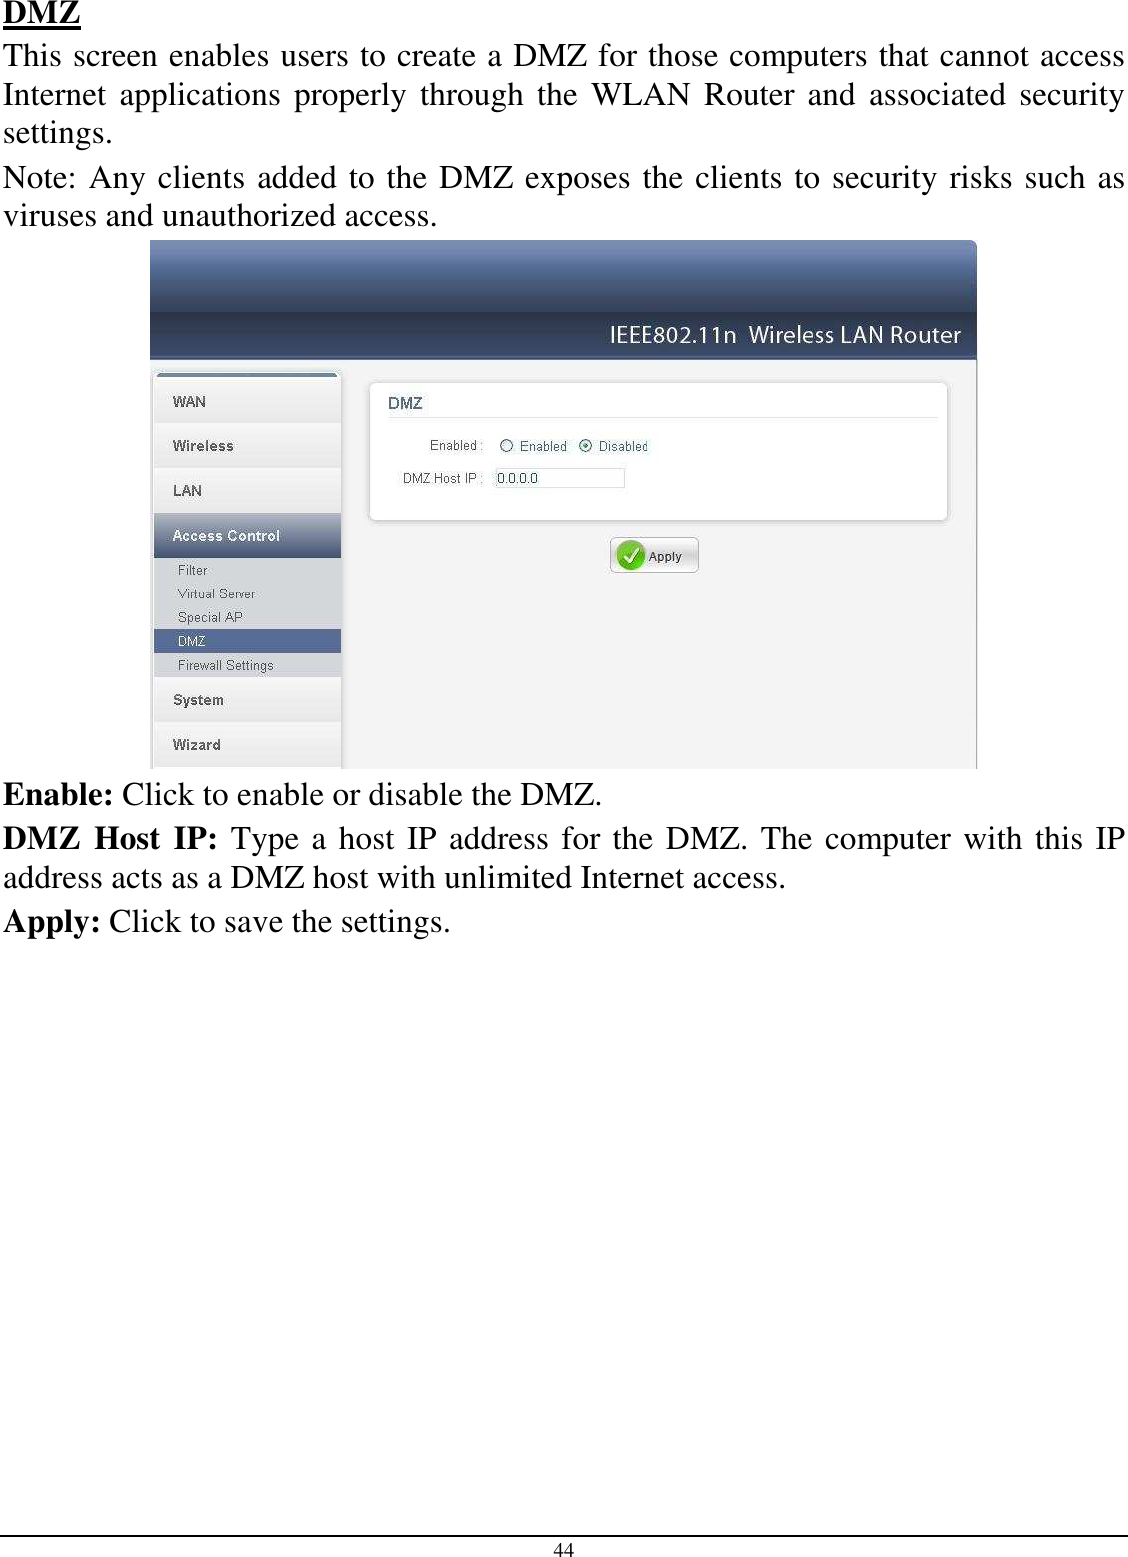 44 DMZ This screen enables users to create a DMZ for those computers that cannot access Internet  applications  properly through  the  WLAN  Router and  associated security settings.  Note: Any clients added to the DMZ exposes the clients to security risks such as viruses and unauthorized access.  Enable: Click to enable or disable the DMZ. DMZ Host IP: Type a host IP address for the DMZ. The computer with this IP address acts as a DMZ host with unlimited Internet access. Apply: Click to save the settings.  